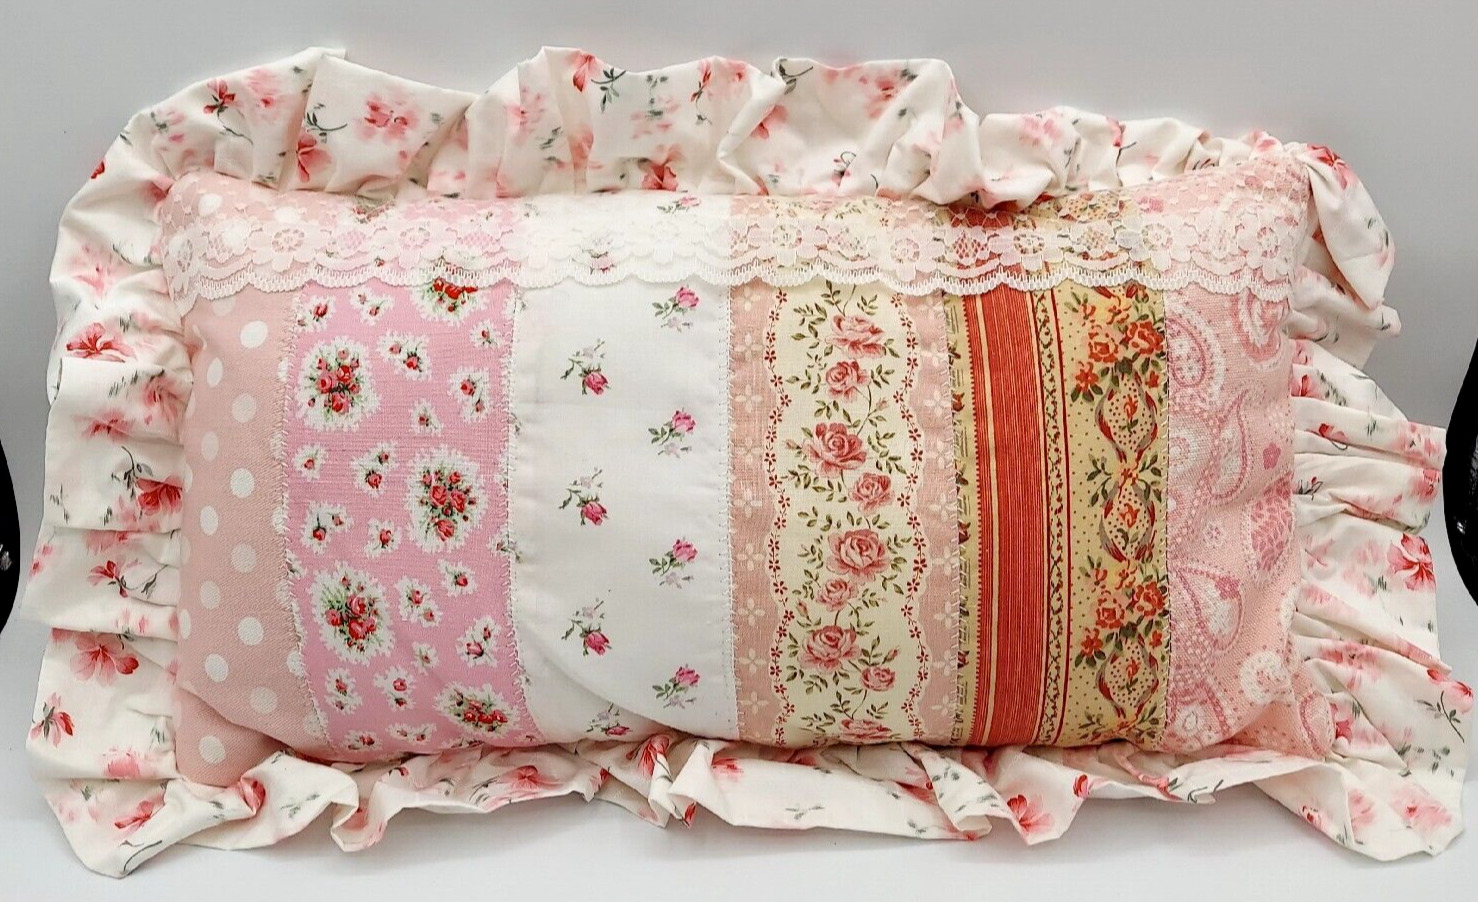 New vtg handmade shabby cottage core chic patchwork ruffled roses throw pillow